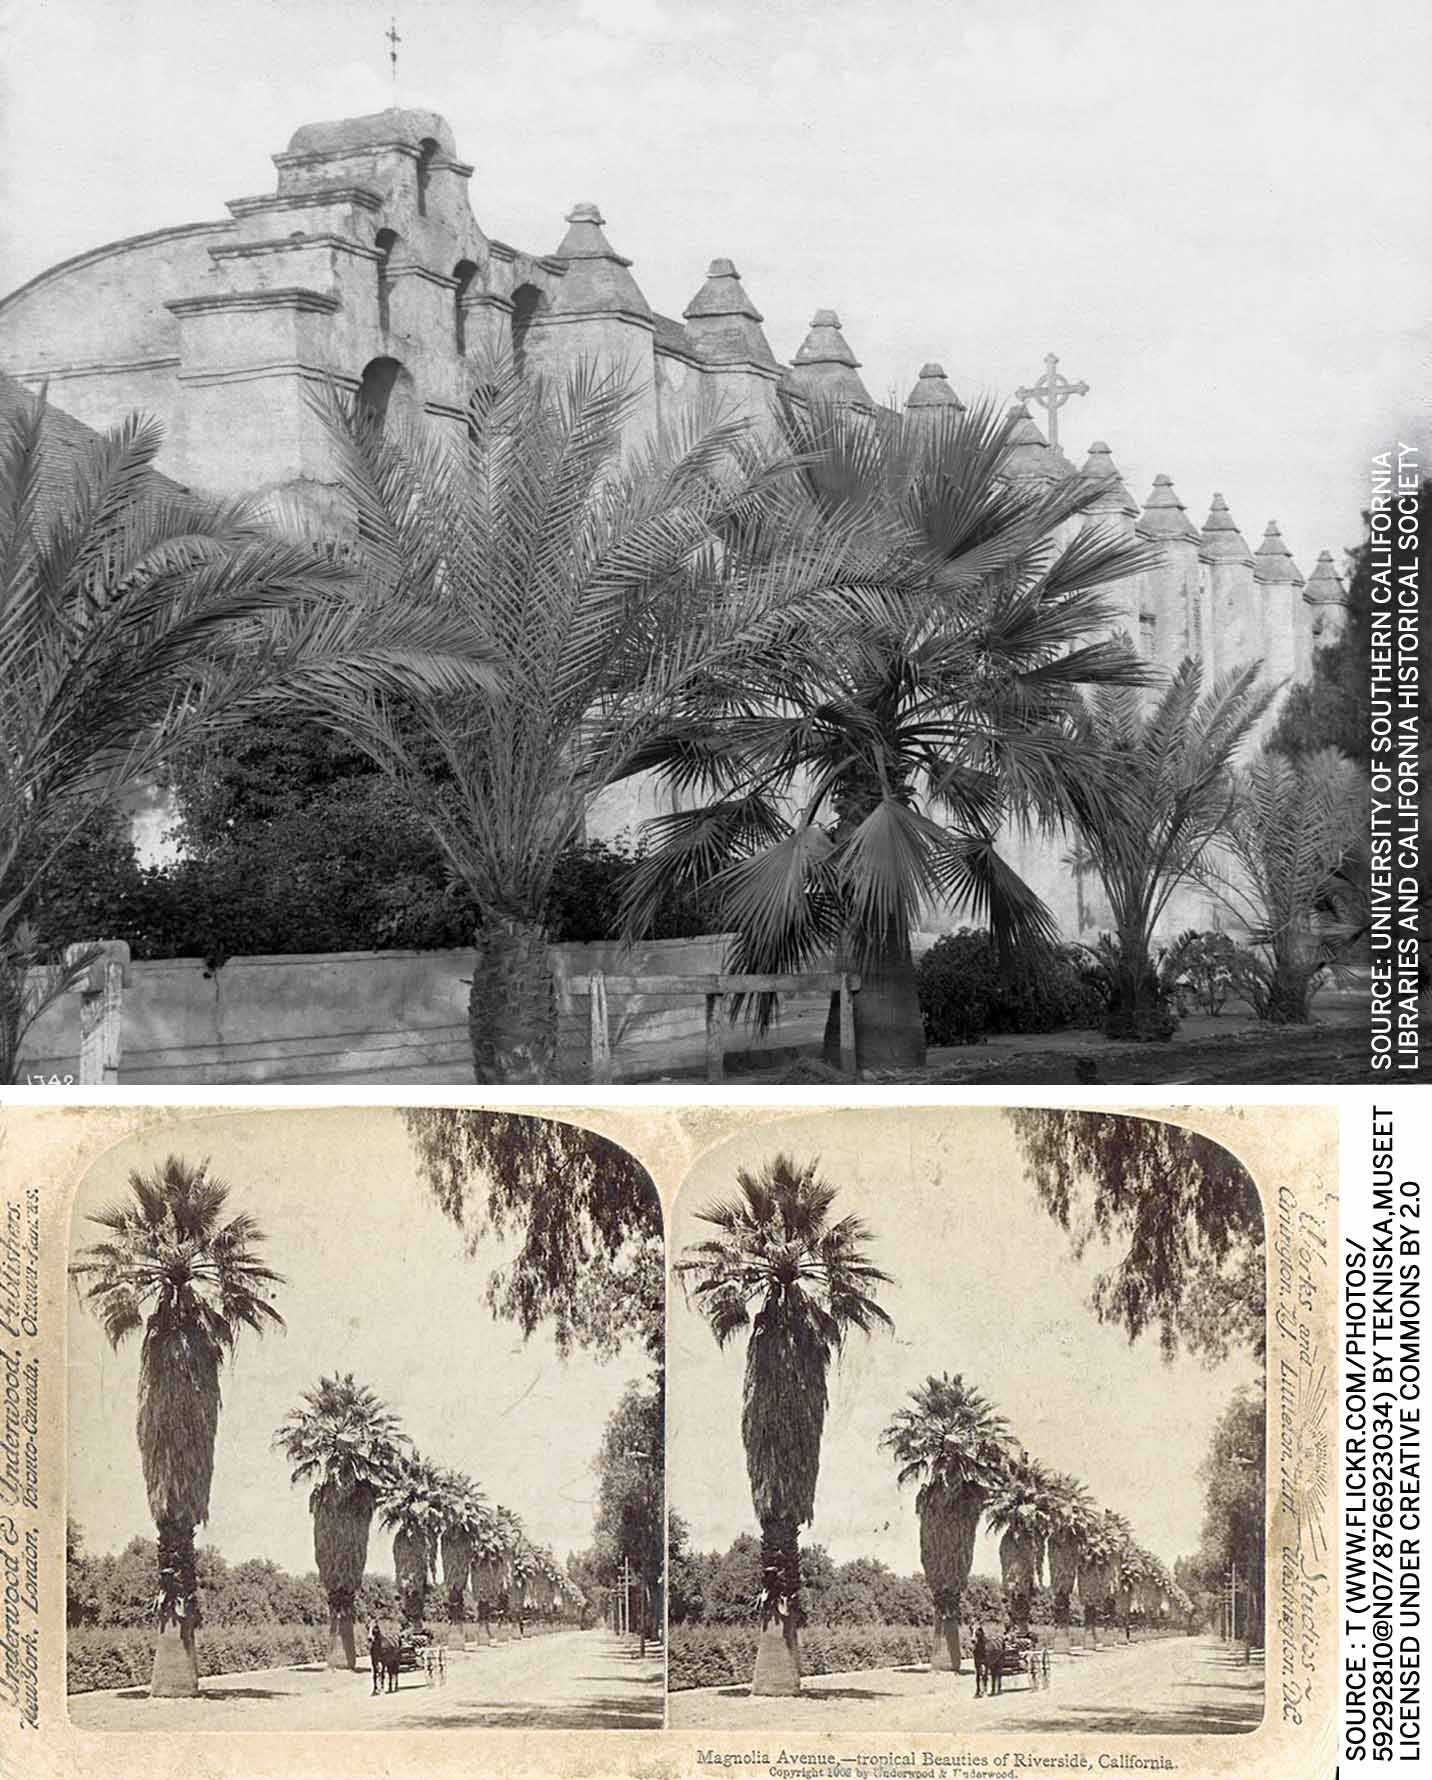 immigrant-trees-of-los-angeles-south-front-mission-sab-gabrie-palm-1900-ca-tropial-beauties-riverside-california-ca-1920